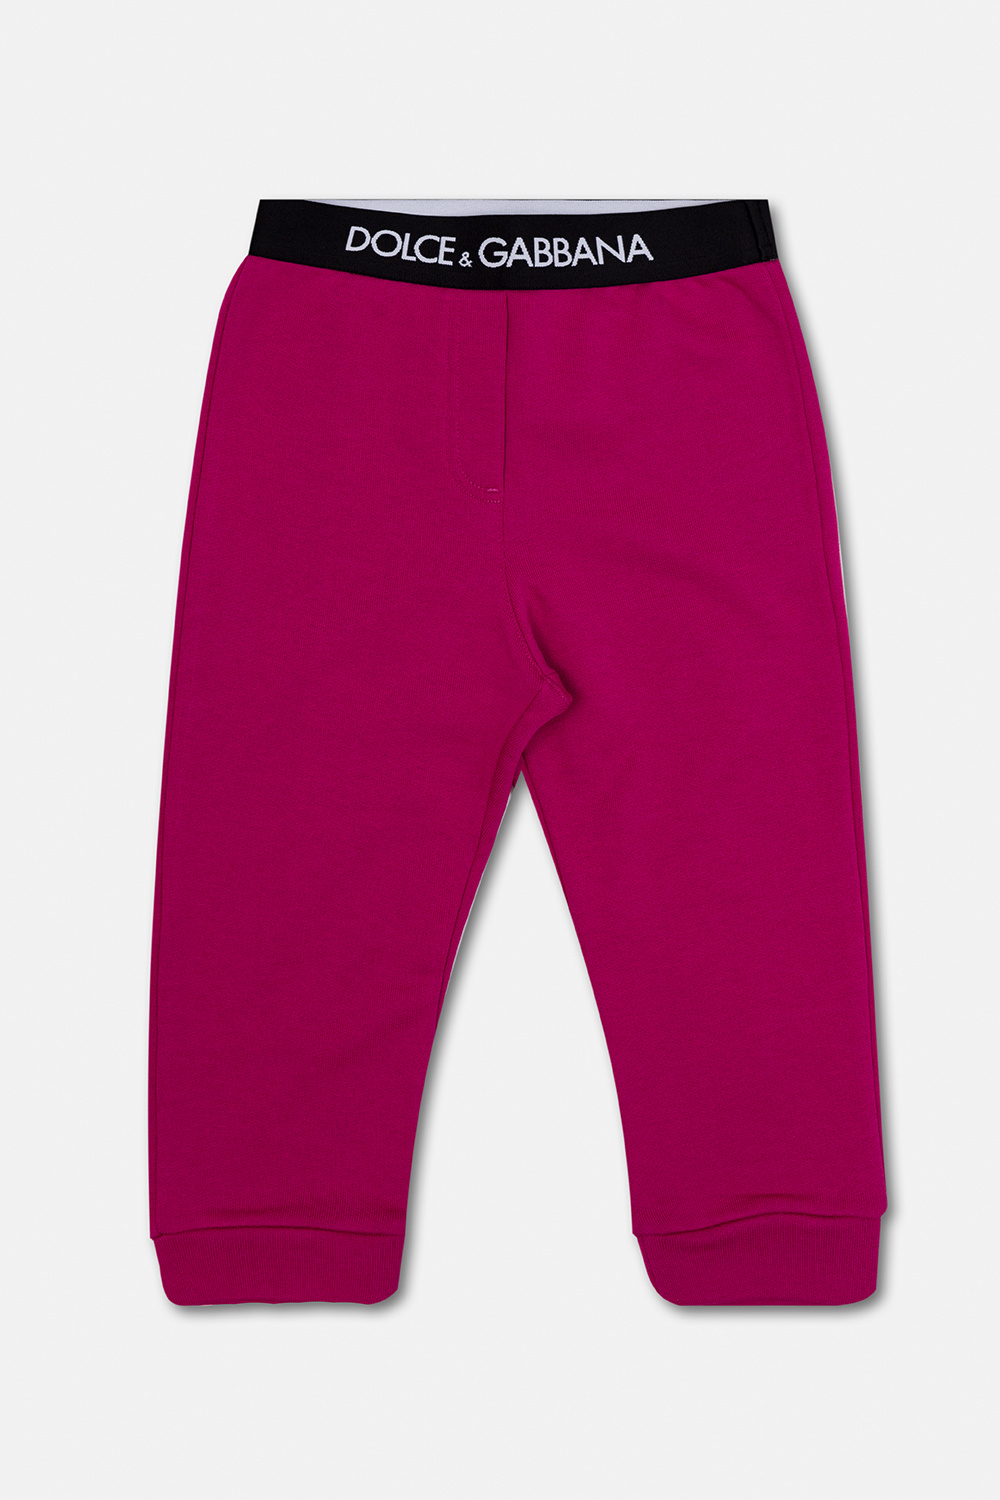 Dolce & Gabbana Kids Cotton material trousers with logo